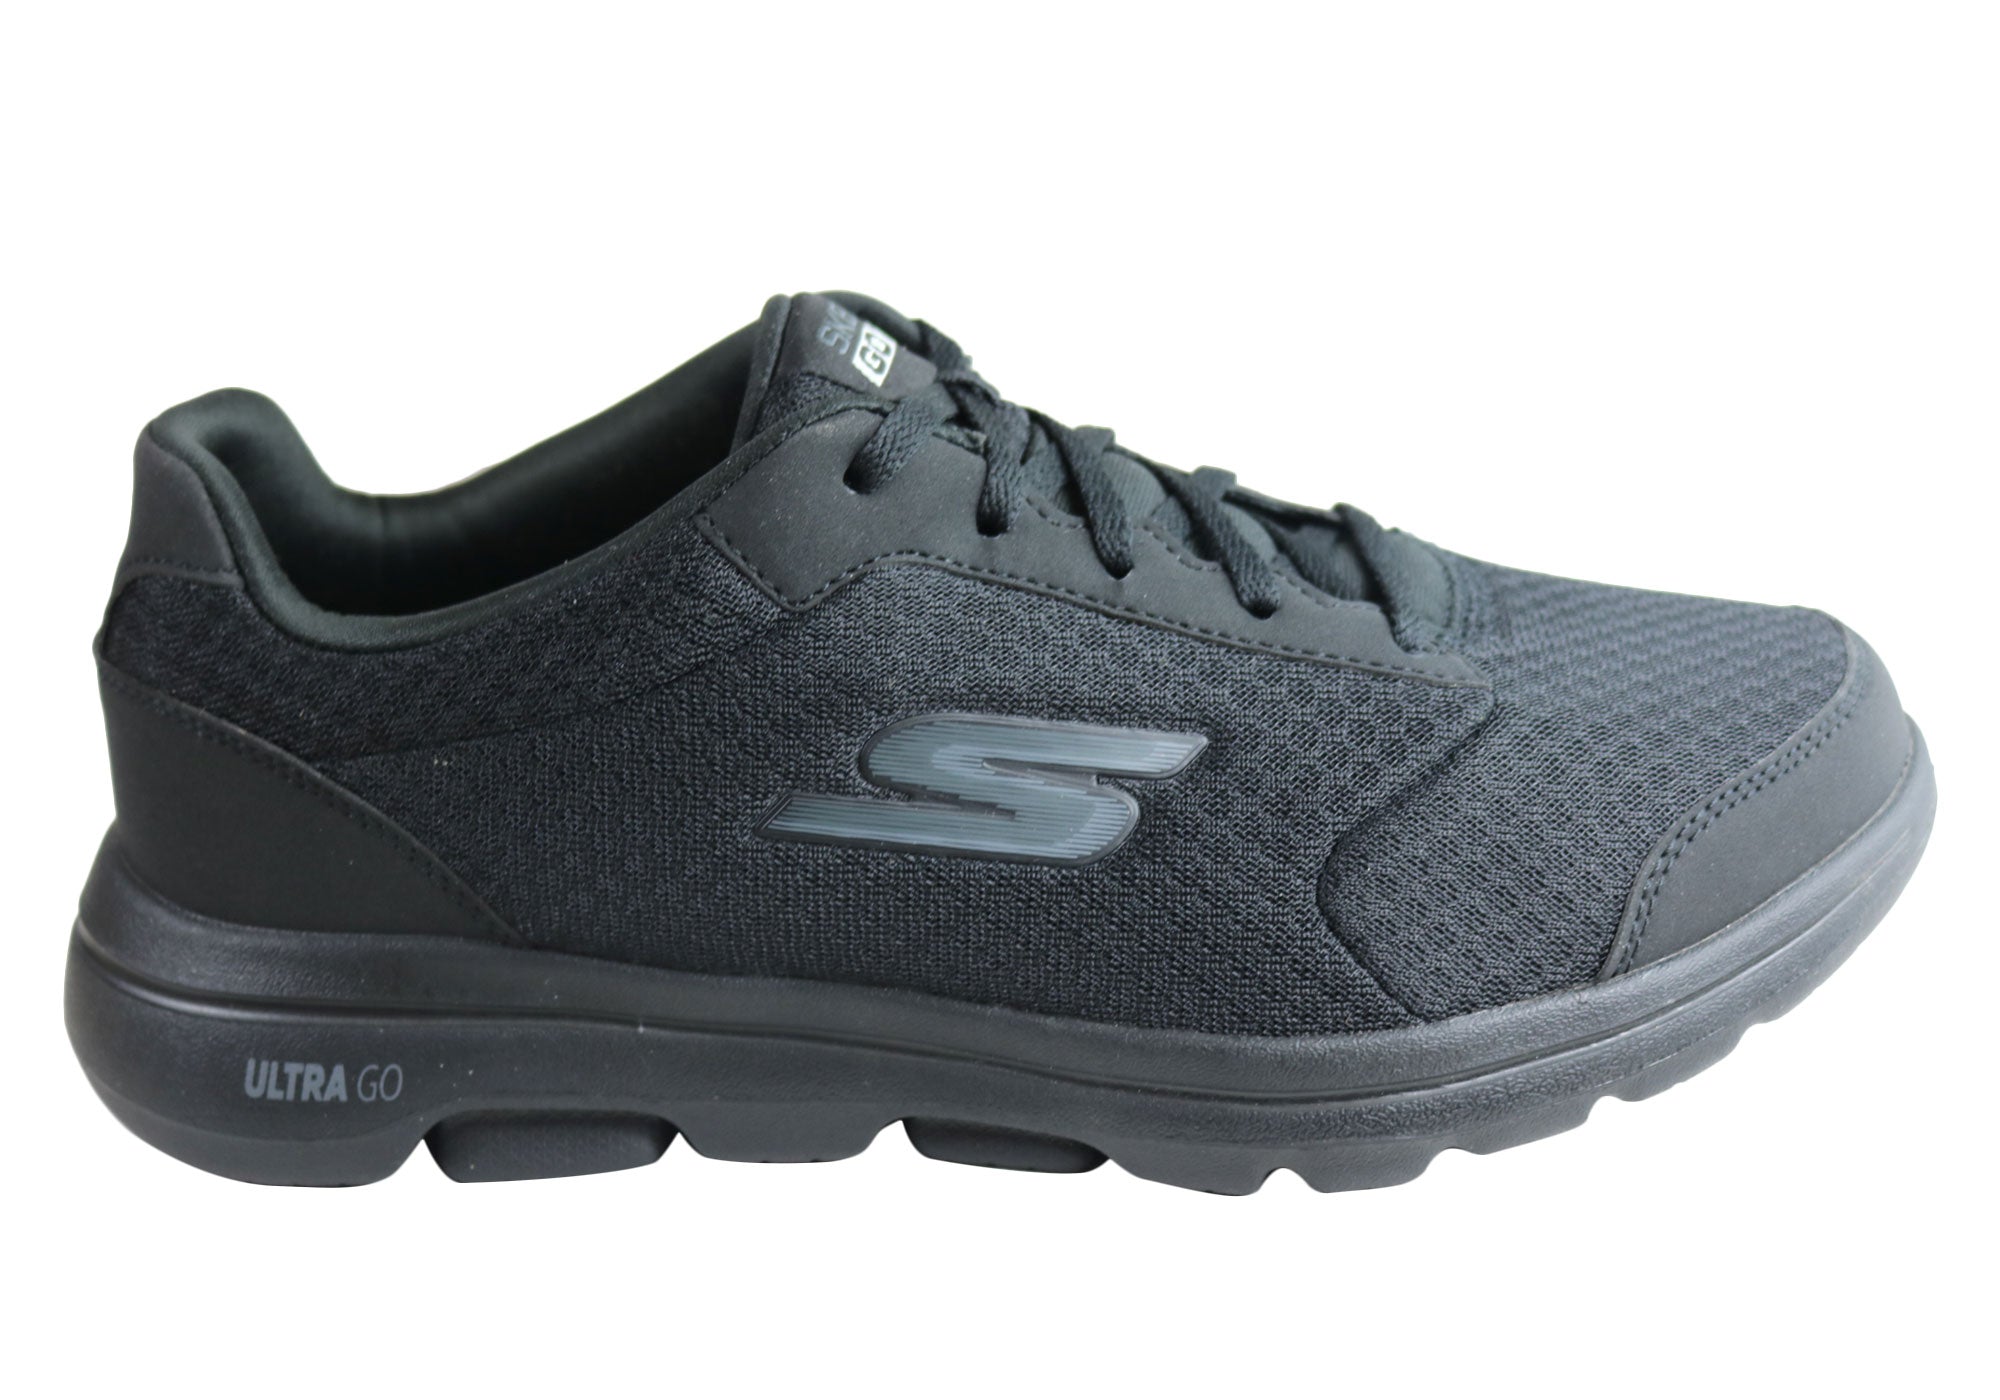 skechers shoes wide fitting